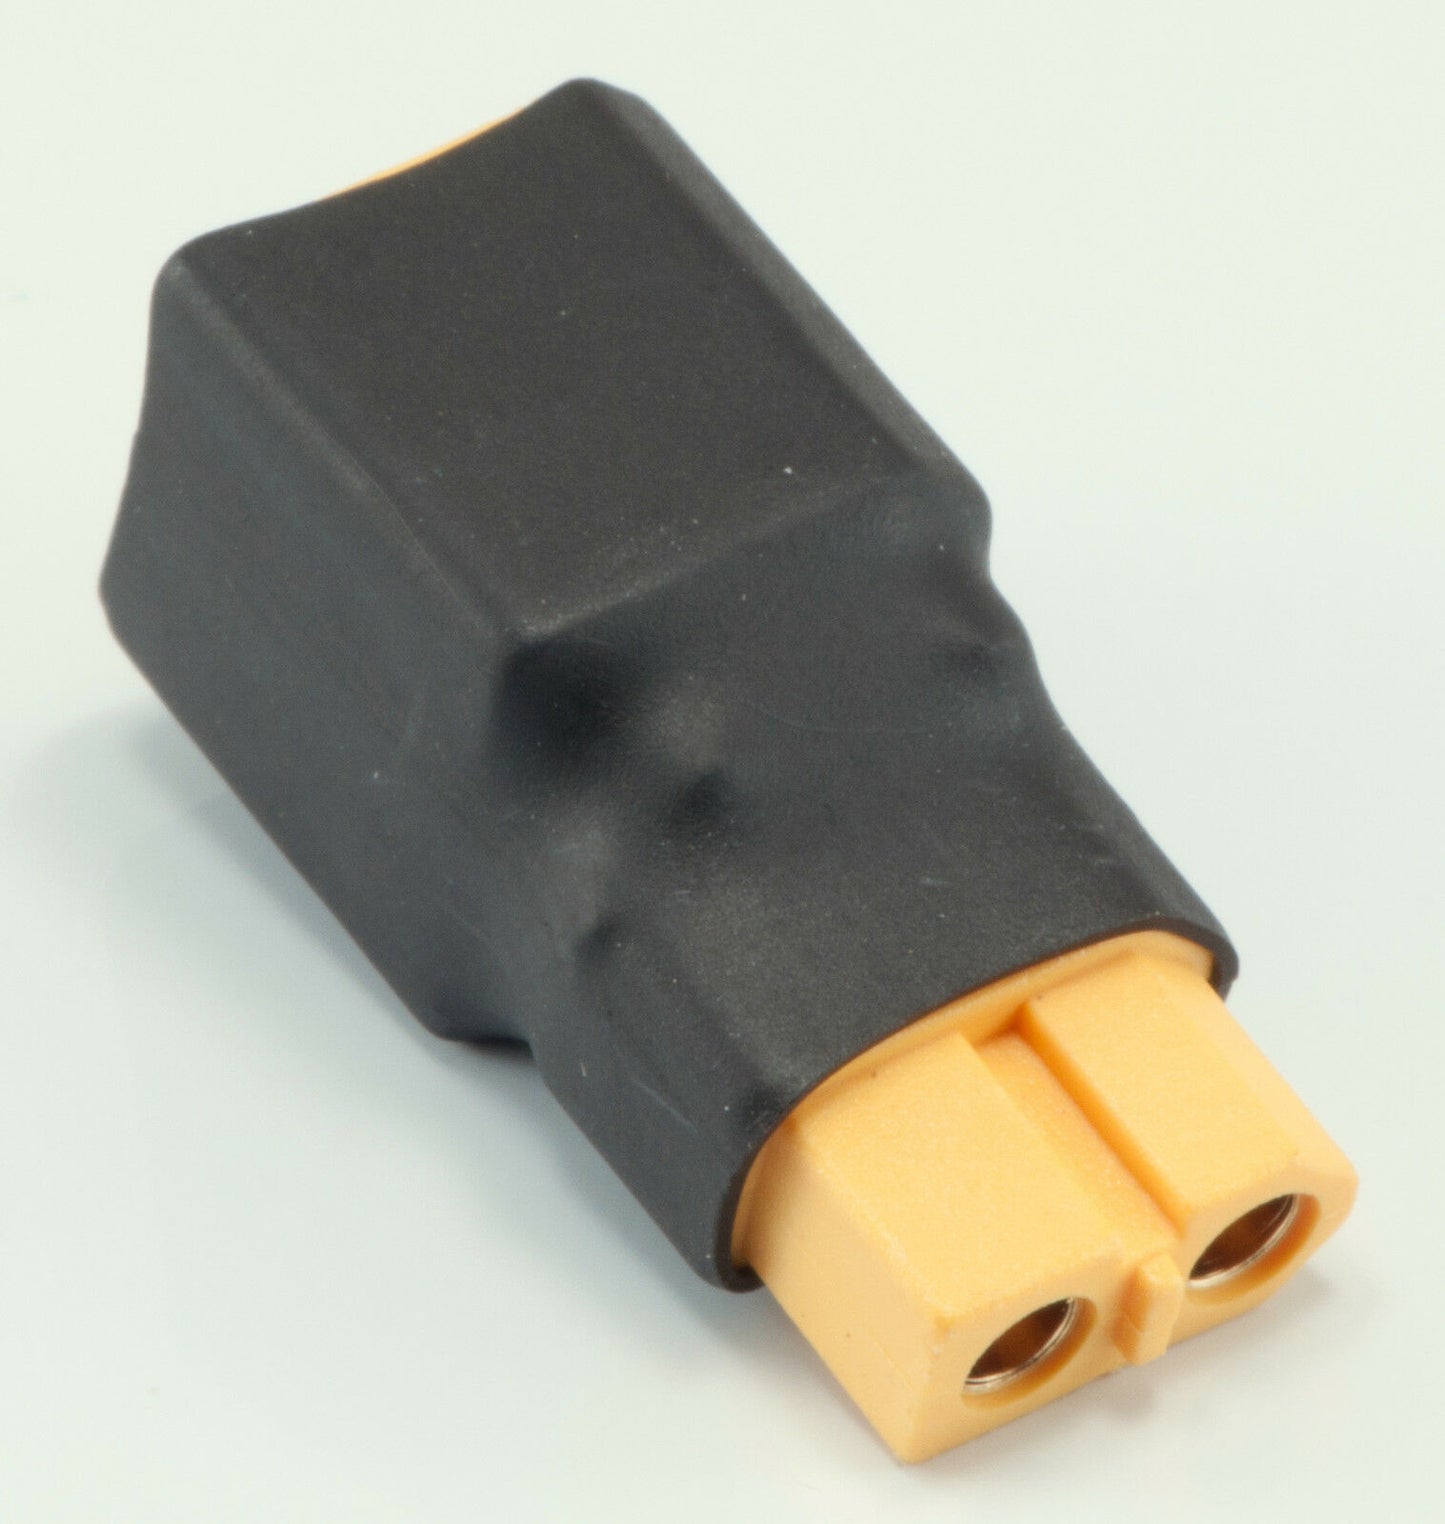 No Wires: XT60 Parallel Battery Connector